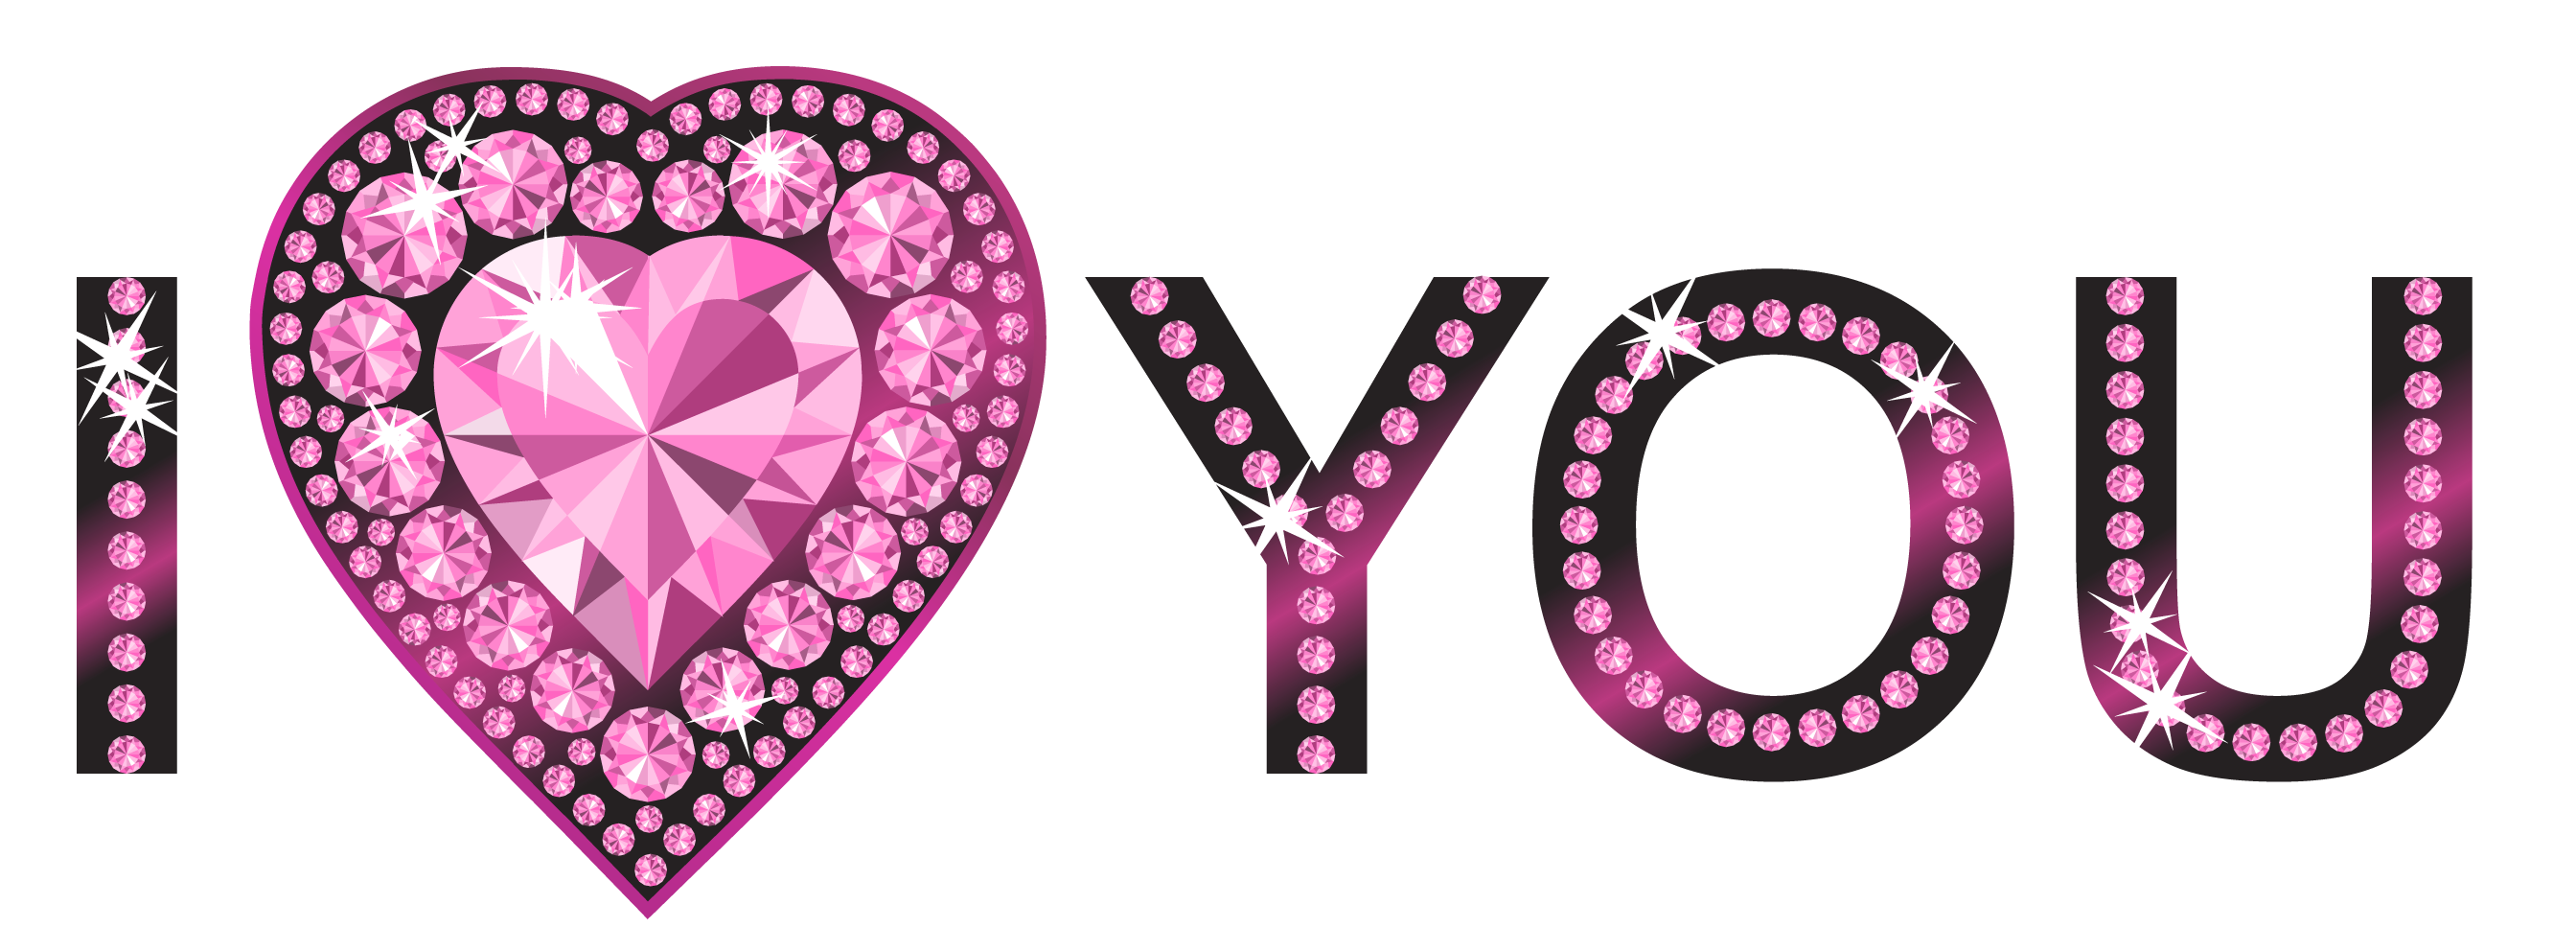 clipart of i love you - photo #37